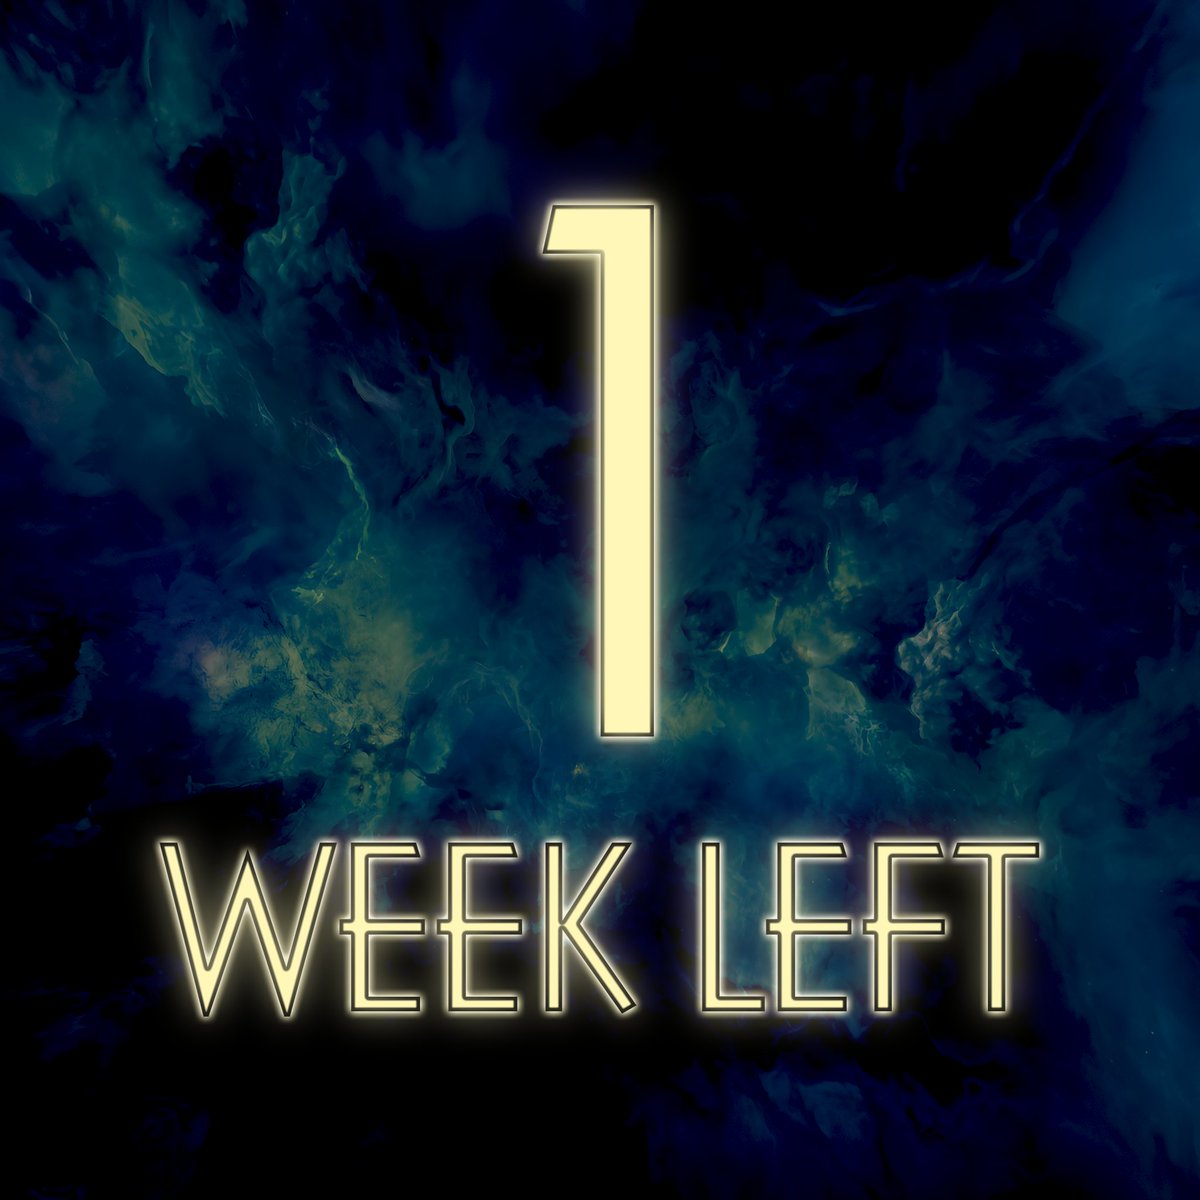 ONLY ONE WEEK LEFT before MASTERS OF LIGHT releases on META QUEST STORE! What a wonderful journey it has been, we cannot wait to hear what you guys think about the game! #MastersOfLight #Coven #VR #vrgaming #vrgames